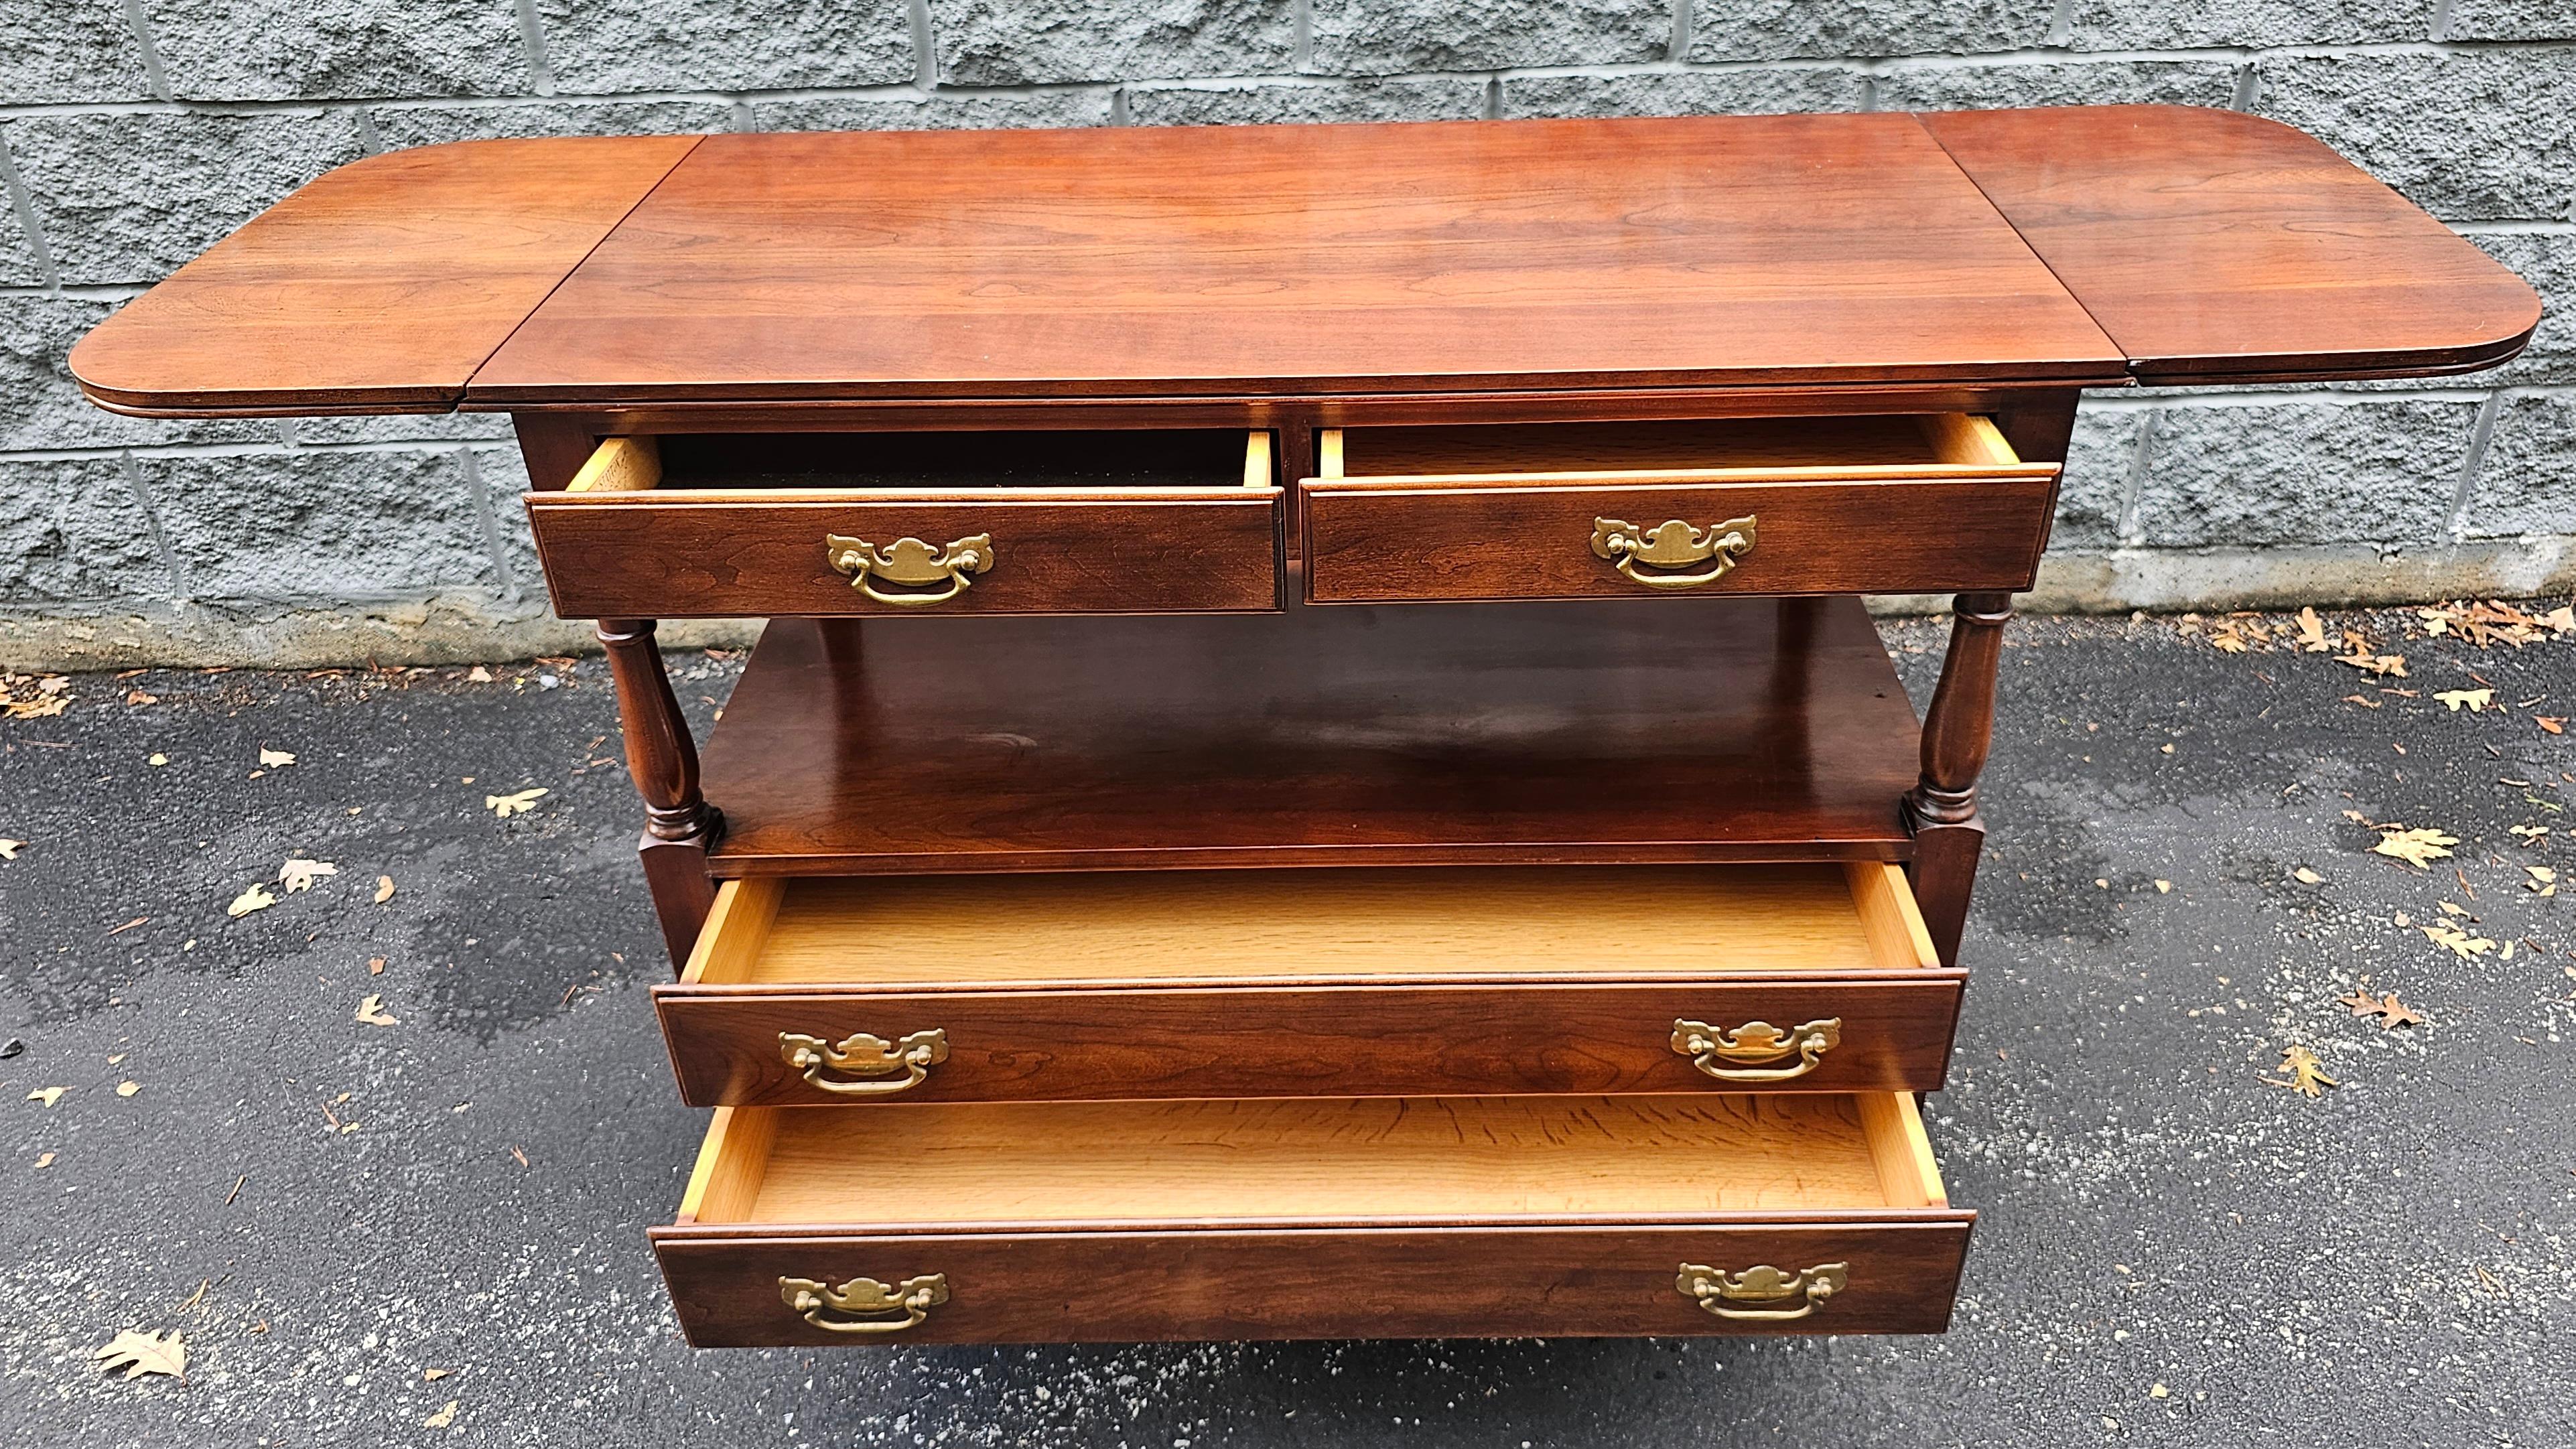 Statton Trutype Cherry Four-Drawer Rolling Drop-Leaf Dry Bar and Buffet Server In Good Condition For Sale In Germantown, MD